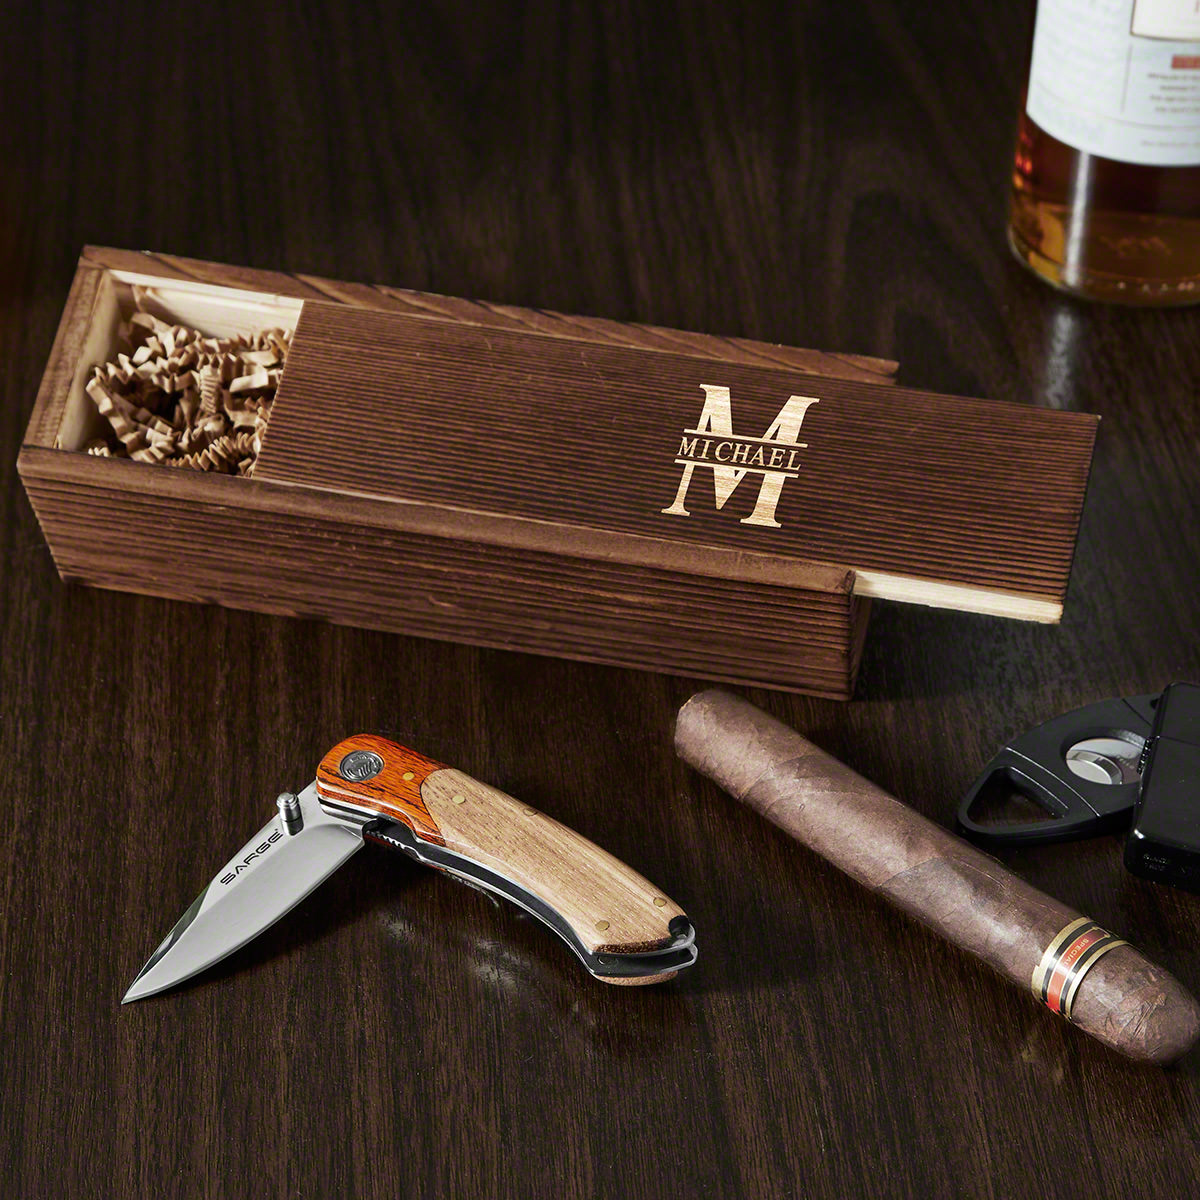 Crafted Knife Gift Set with Personalized Oakmont Box